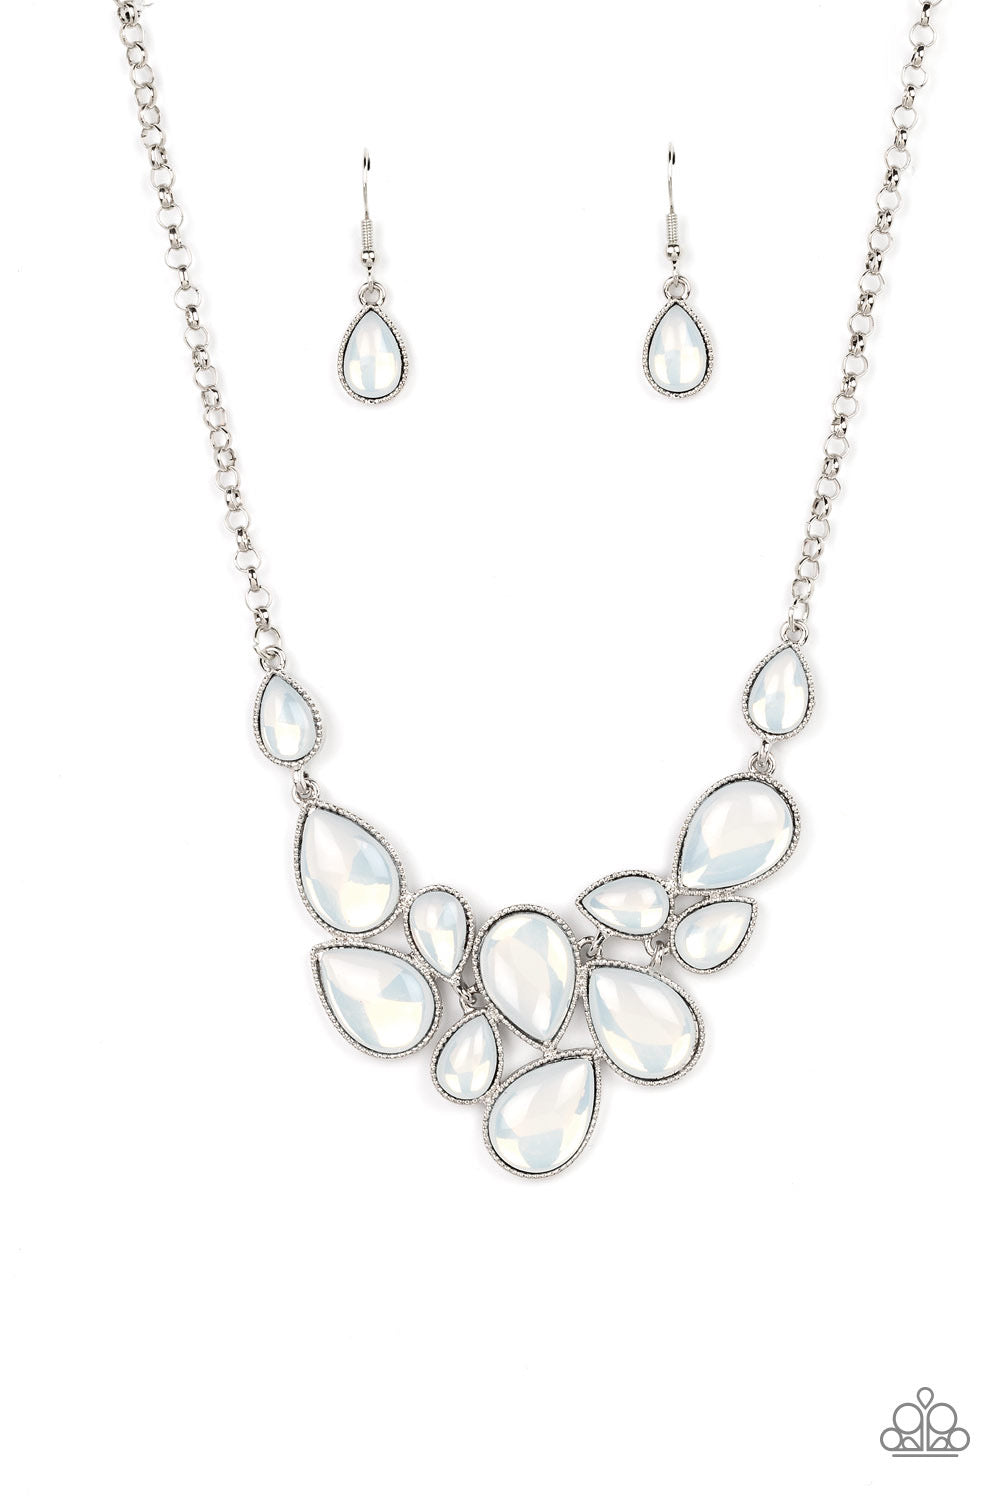 Paparazzi Keeps GLOWING and GLOWING Necklace - White